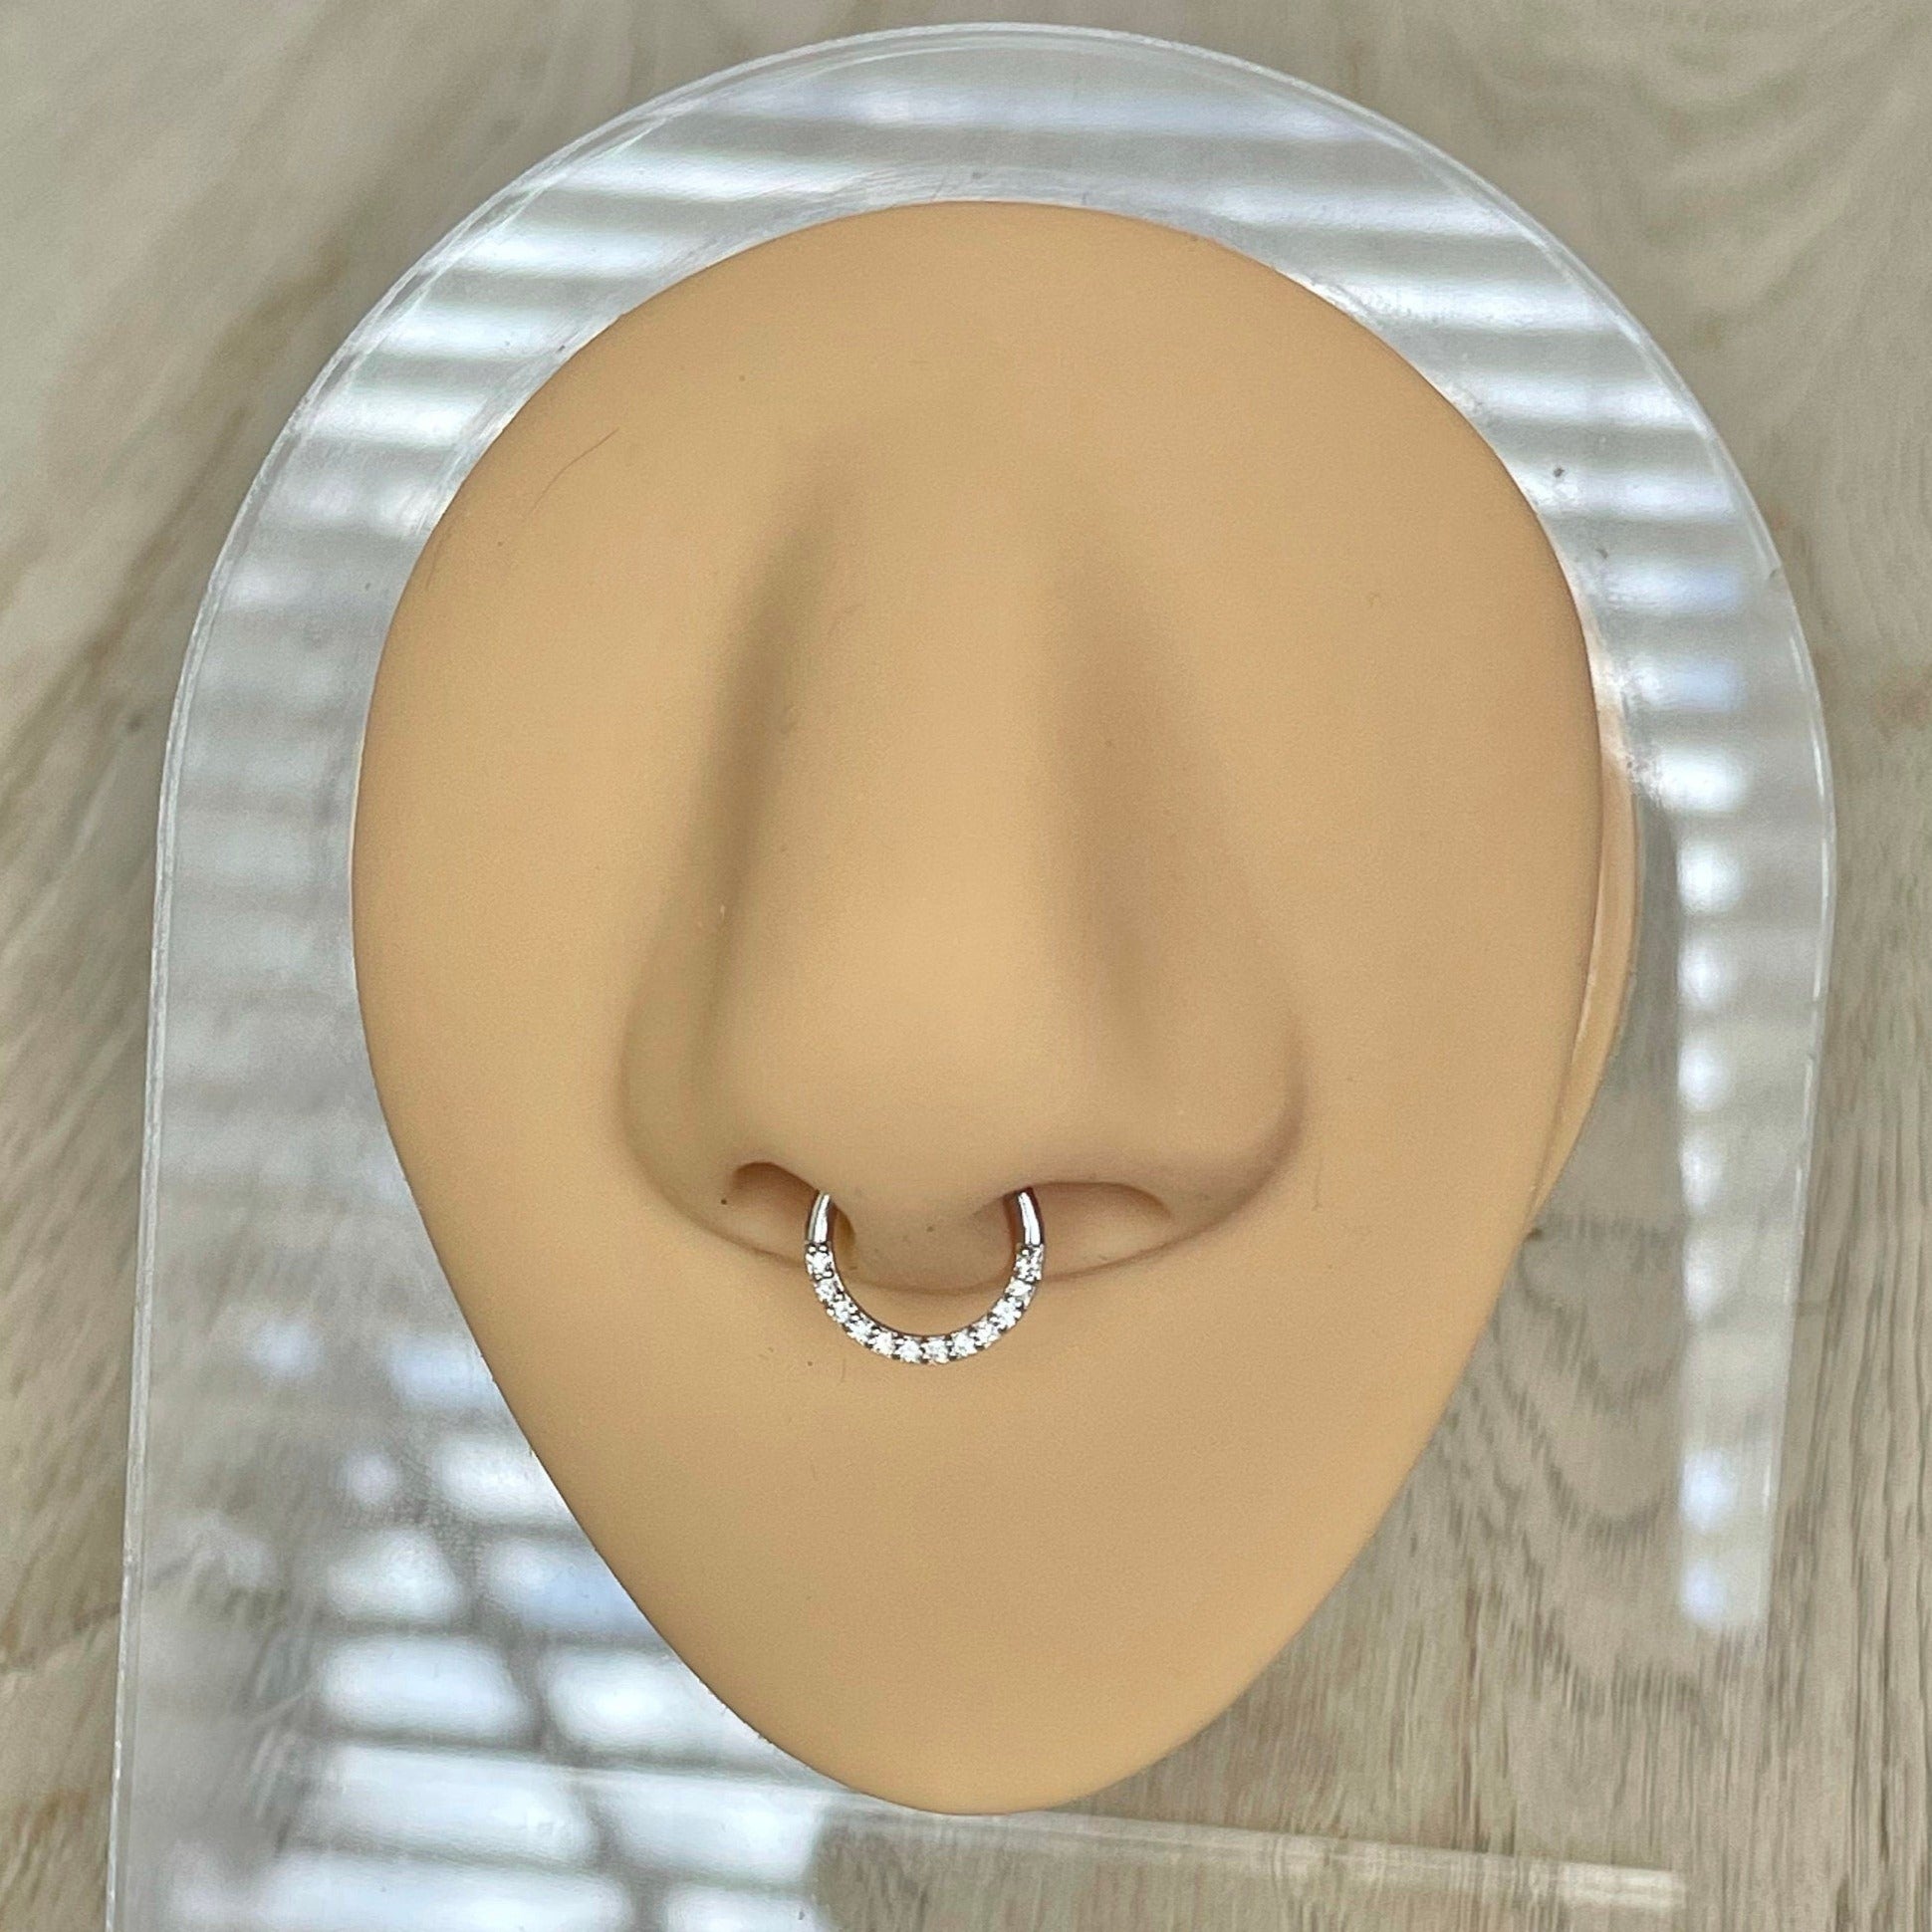 Solid Gold Septum Ring (16G | 6mm, 7mm, 8mm, 9mm, 10mm | Solid 14k Gold | White or Yellow Gold)